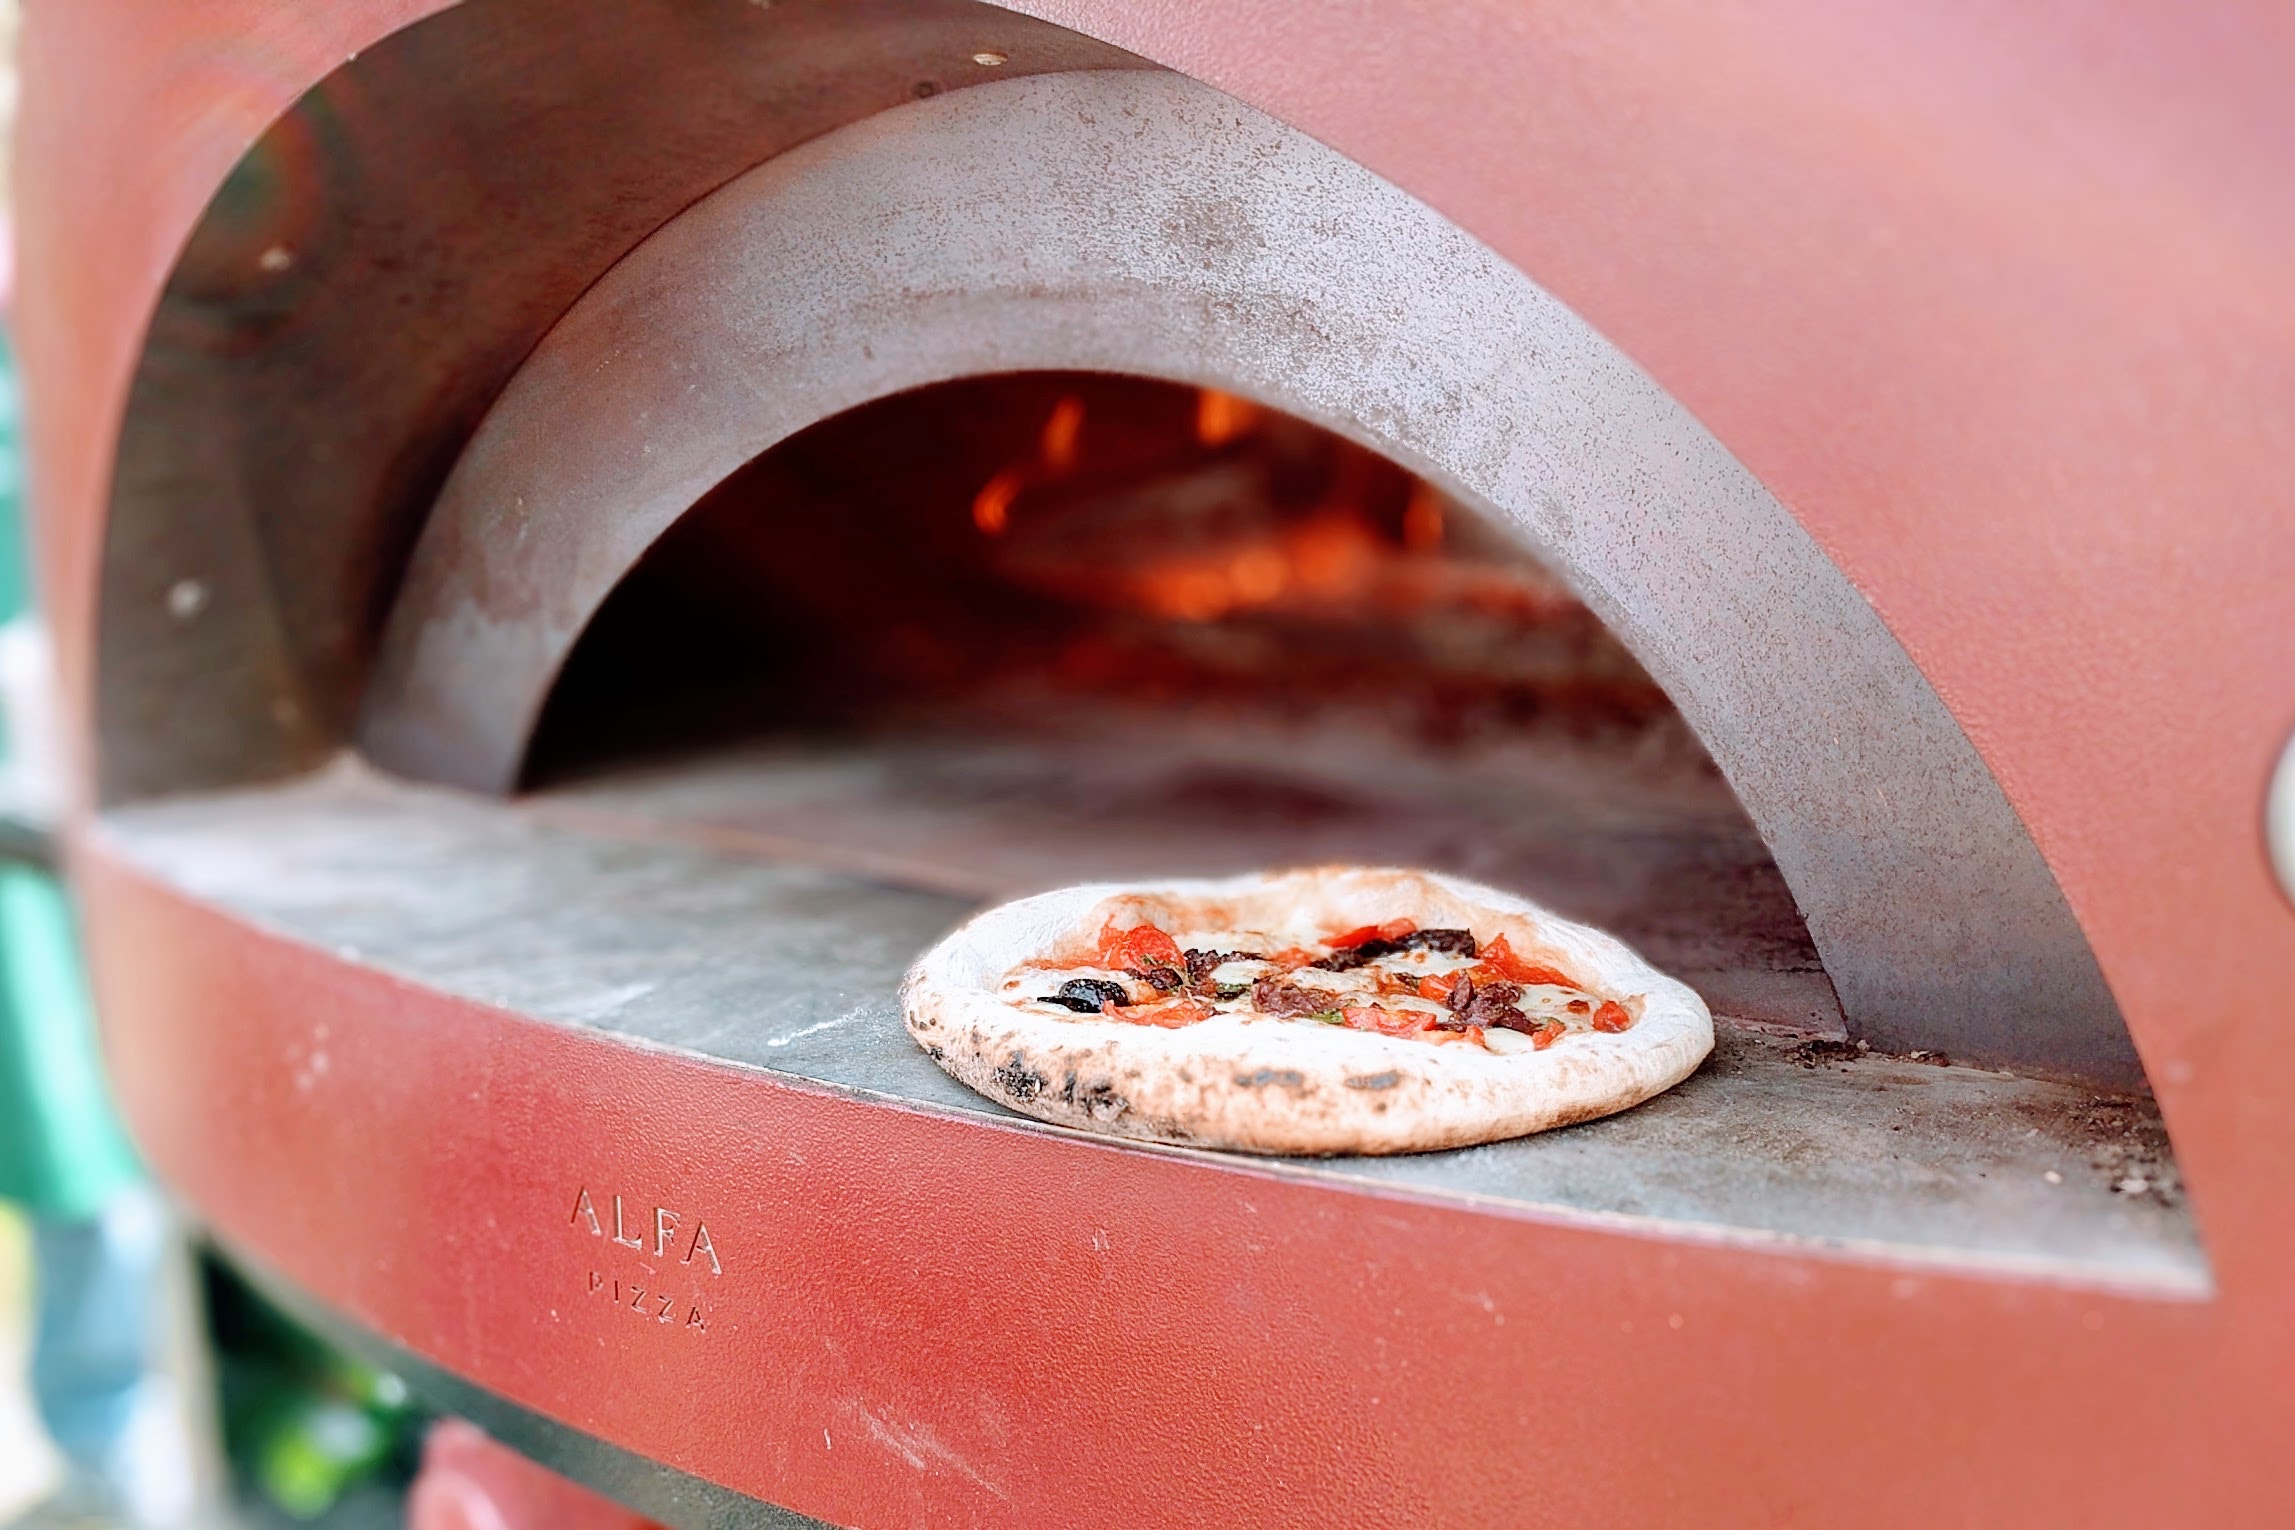 Learn why we use 00 flour to make our Neapolitan pizza.